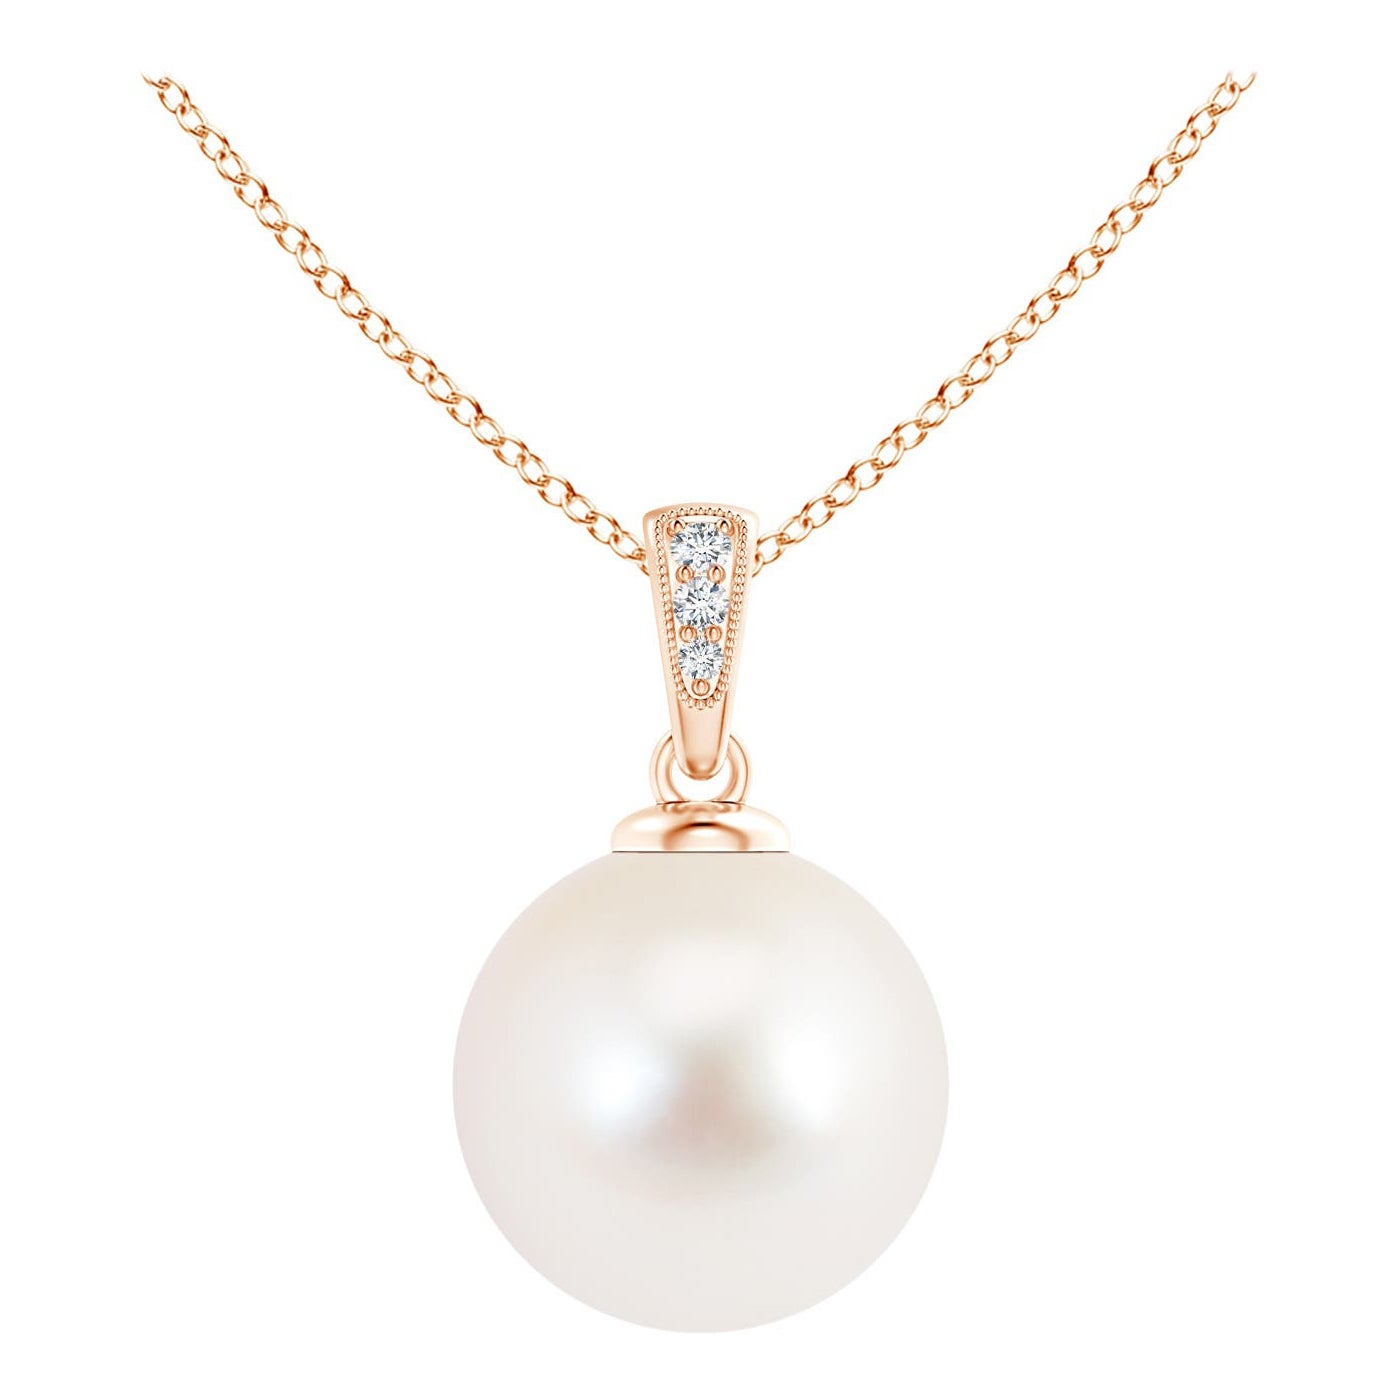 Solitaire Freshwater Cultured Pearl Pendant with Diamonds in 14K Rose Gold